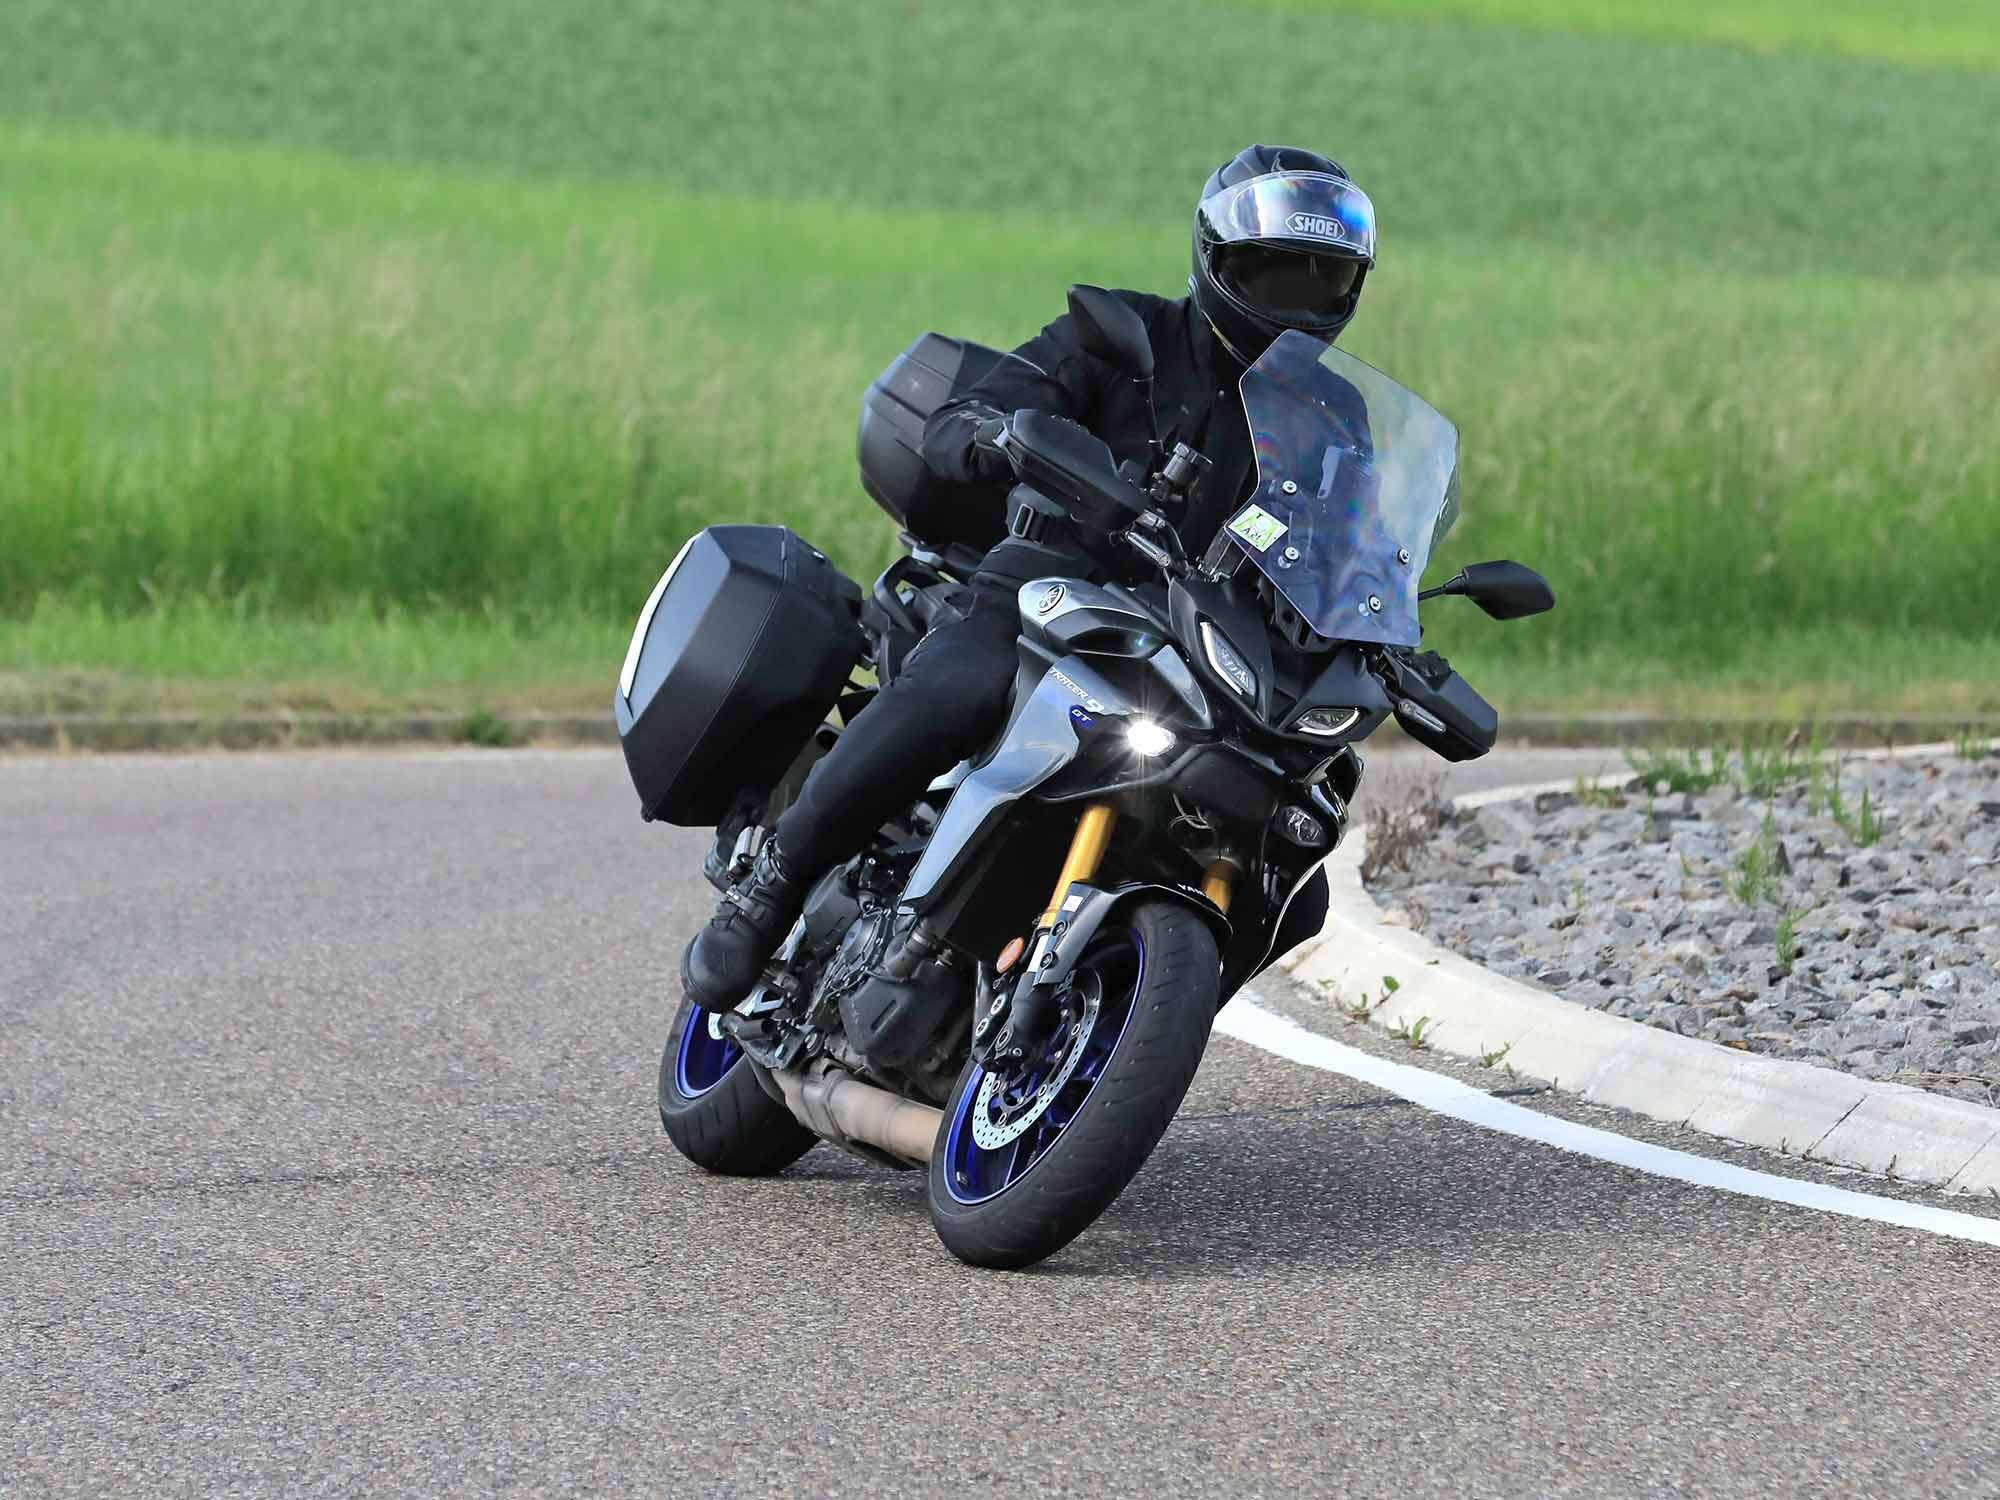 A radar-invisible plastic nose panel can be seen below the headlight in this spy shot, though only if you know it’s there. The bike looks nearly identical to the standard Tracer.